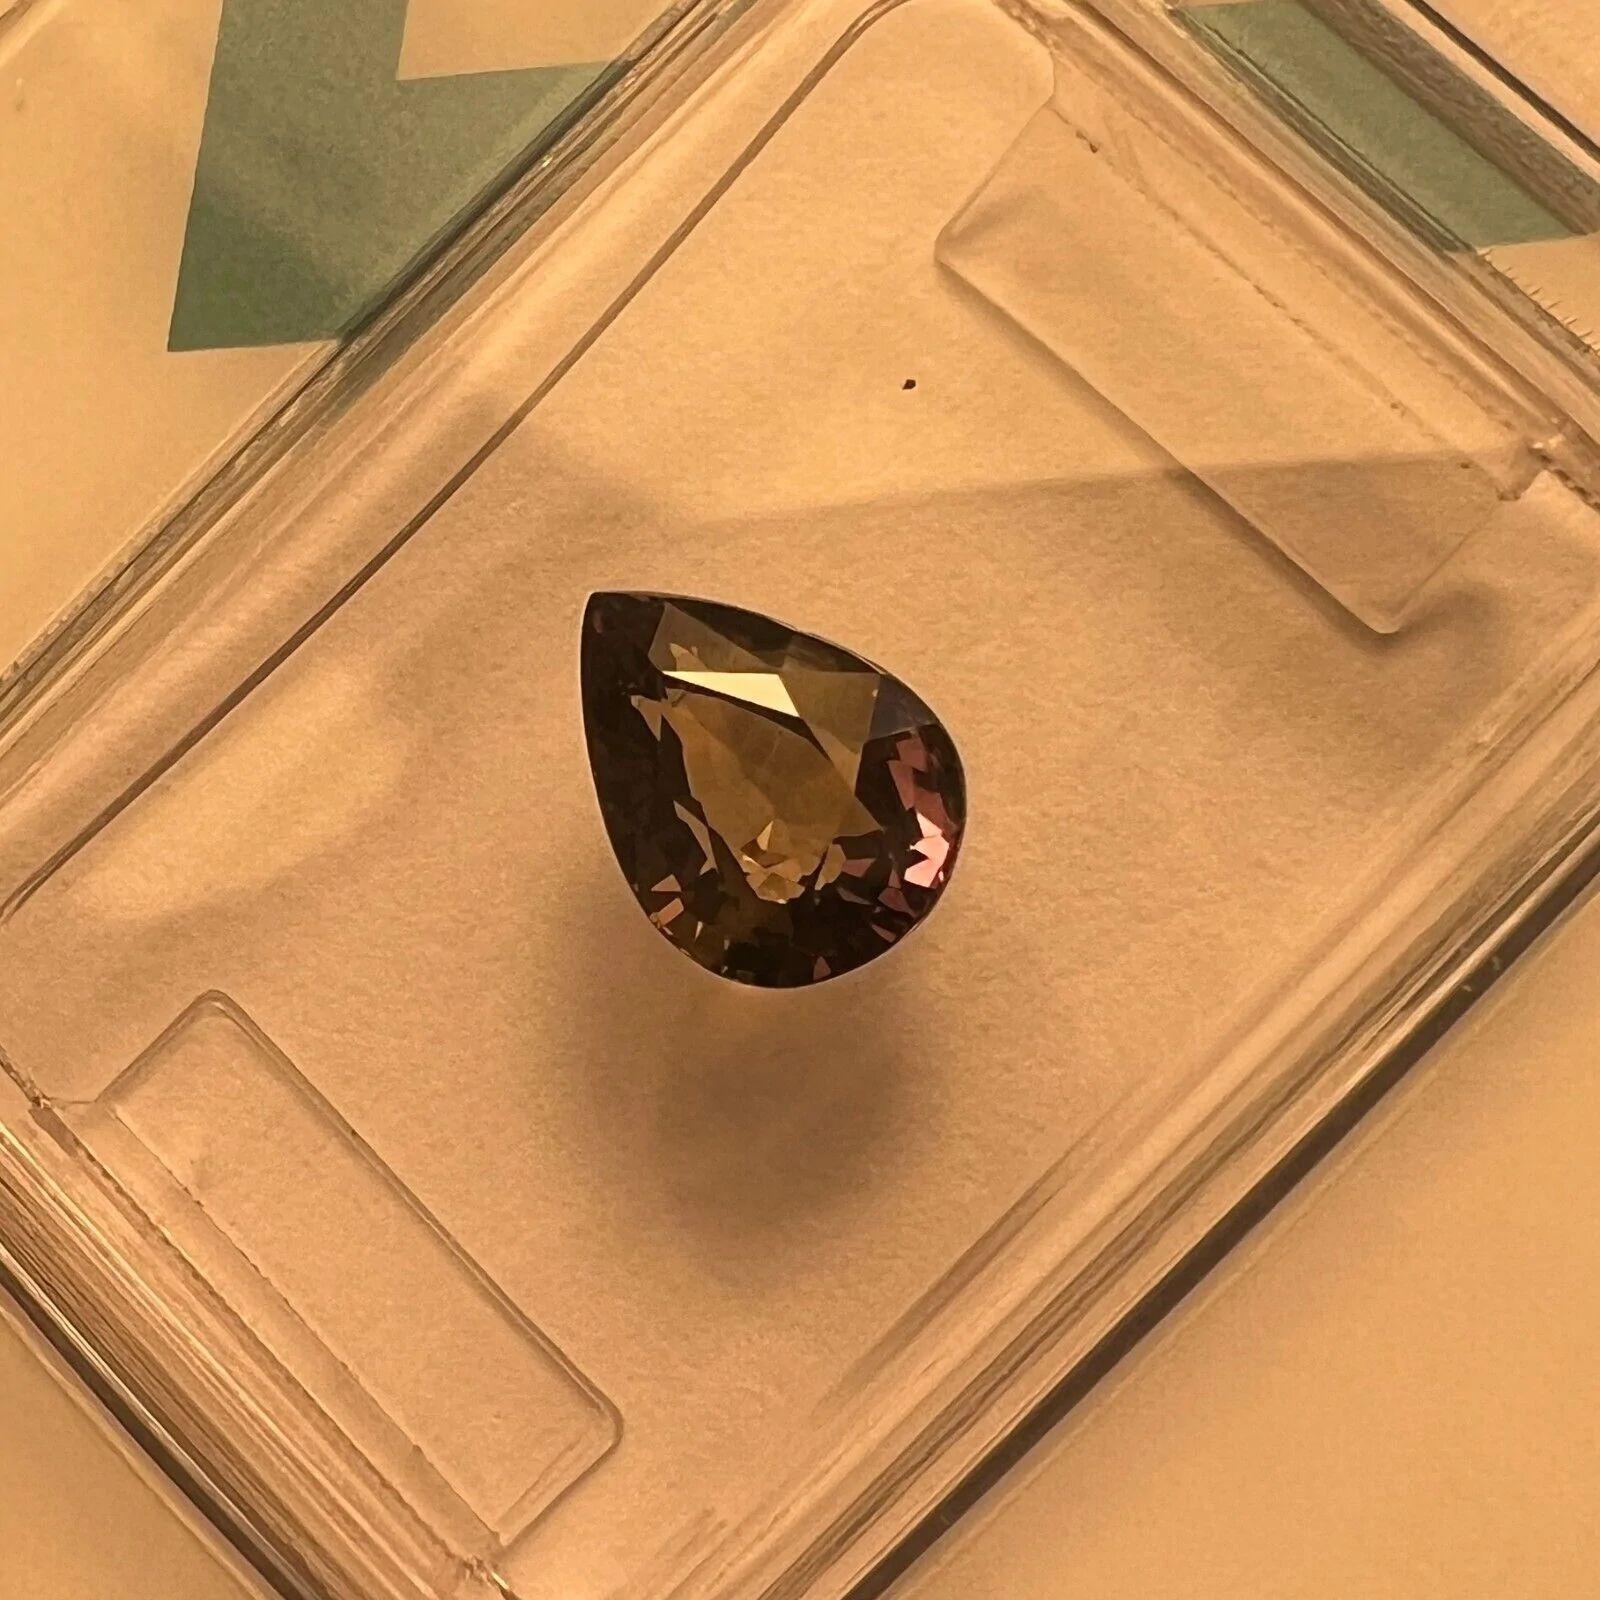 Unique Natural 1.25ct Colour Change Sapphire Pink Yellow Green IGI Certified

Rare Unique Untreated Colour Change Sapphire Gemstone.

1.25 Carat unheated sapphire with a rare colour change effect. Changing colour depending on the light its viewed